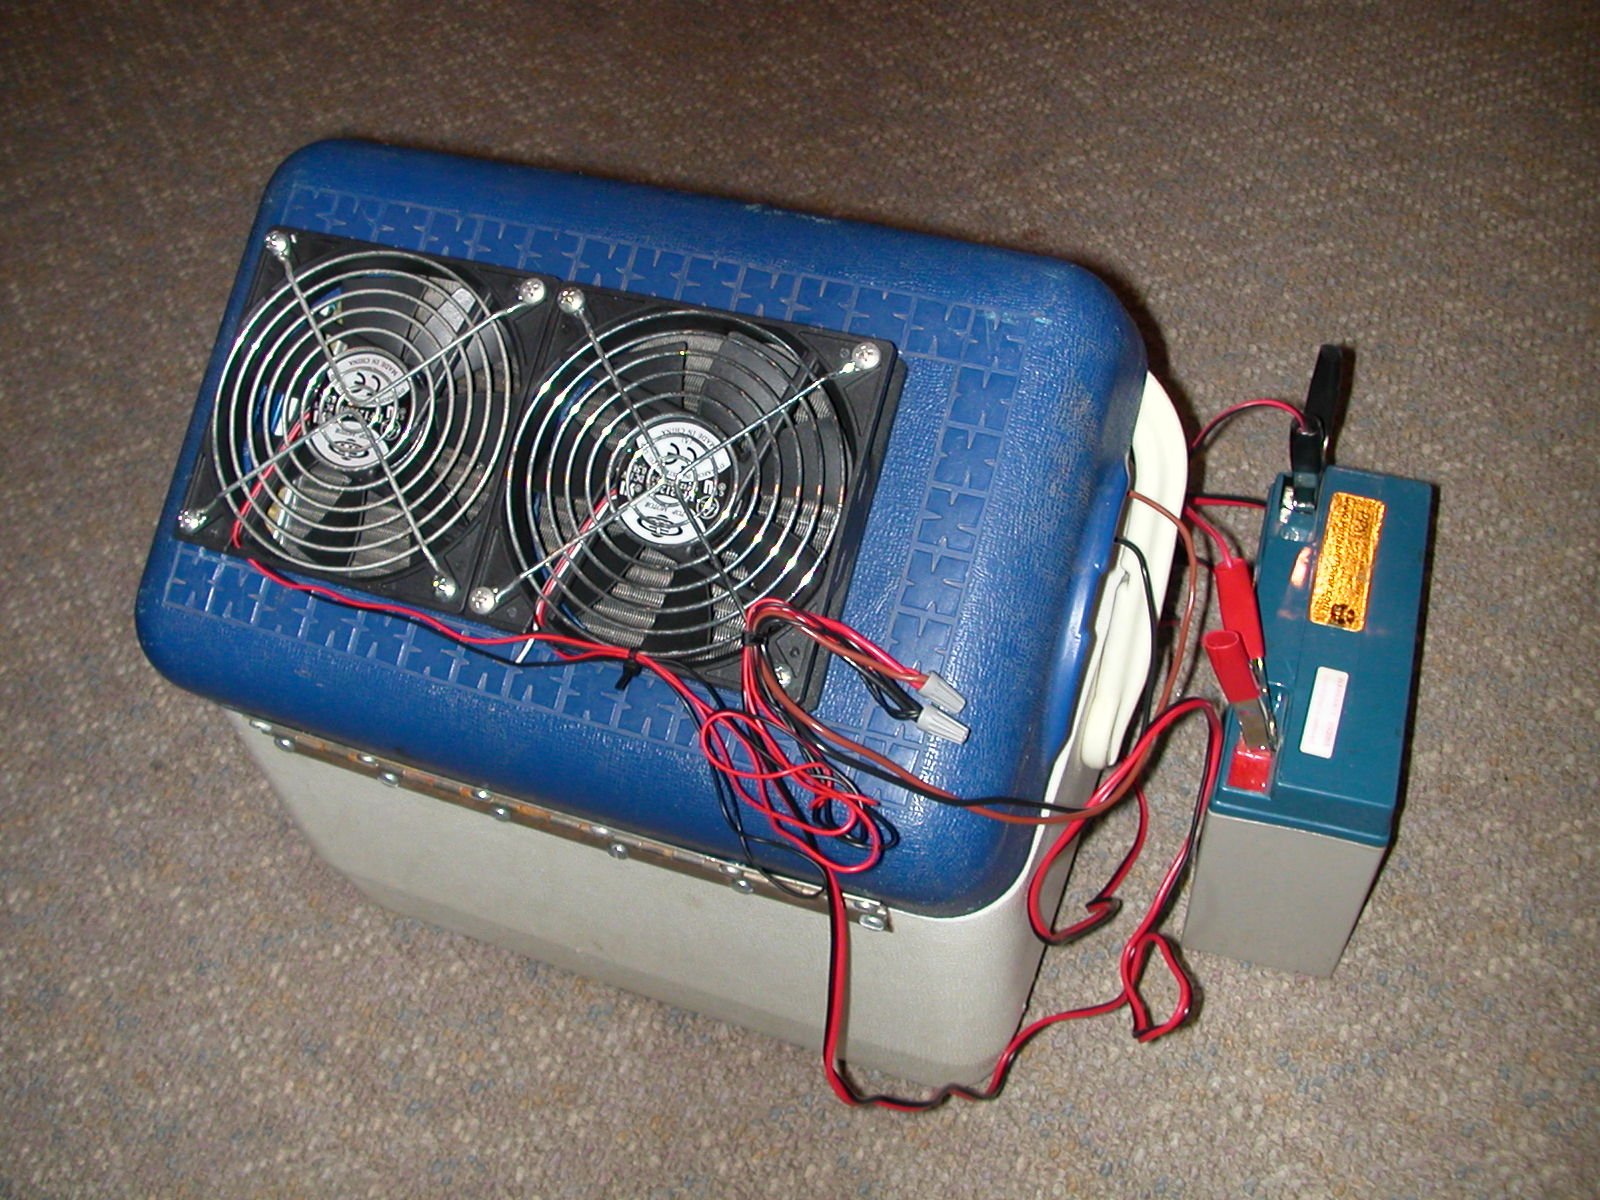 Portable 12V Air Conditioner --Cheap and easy!